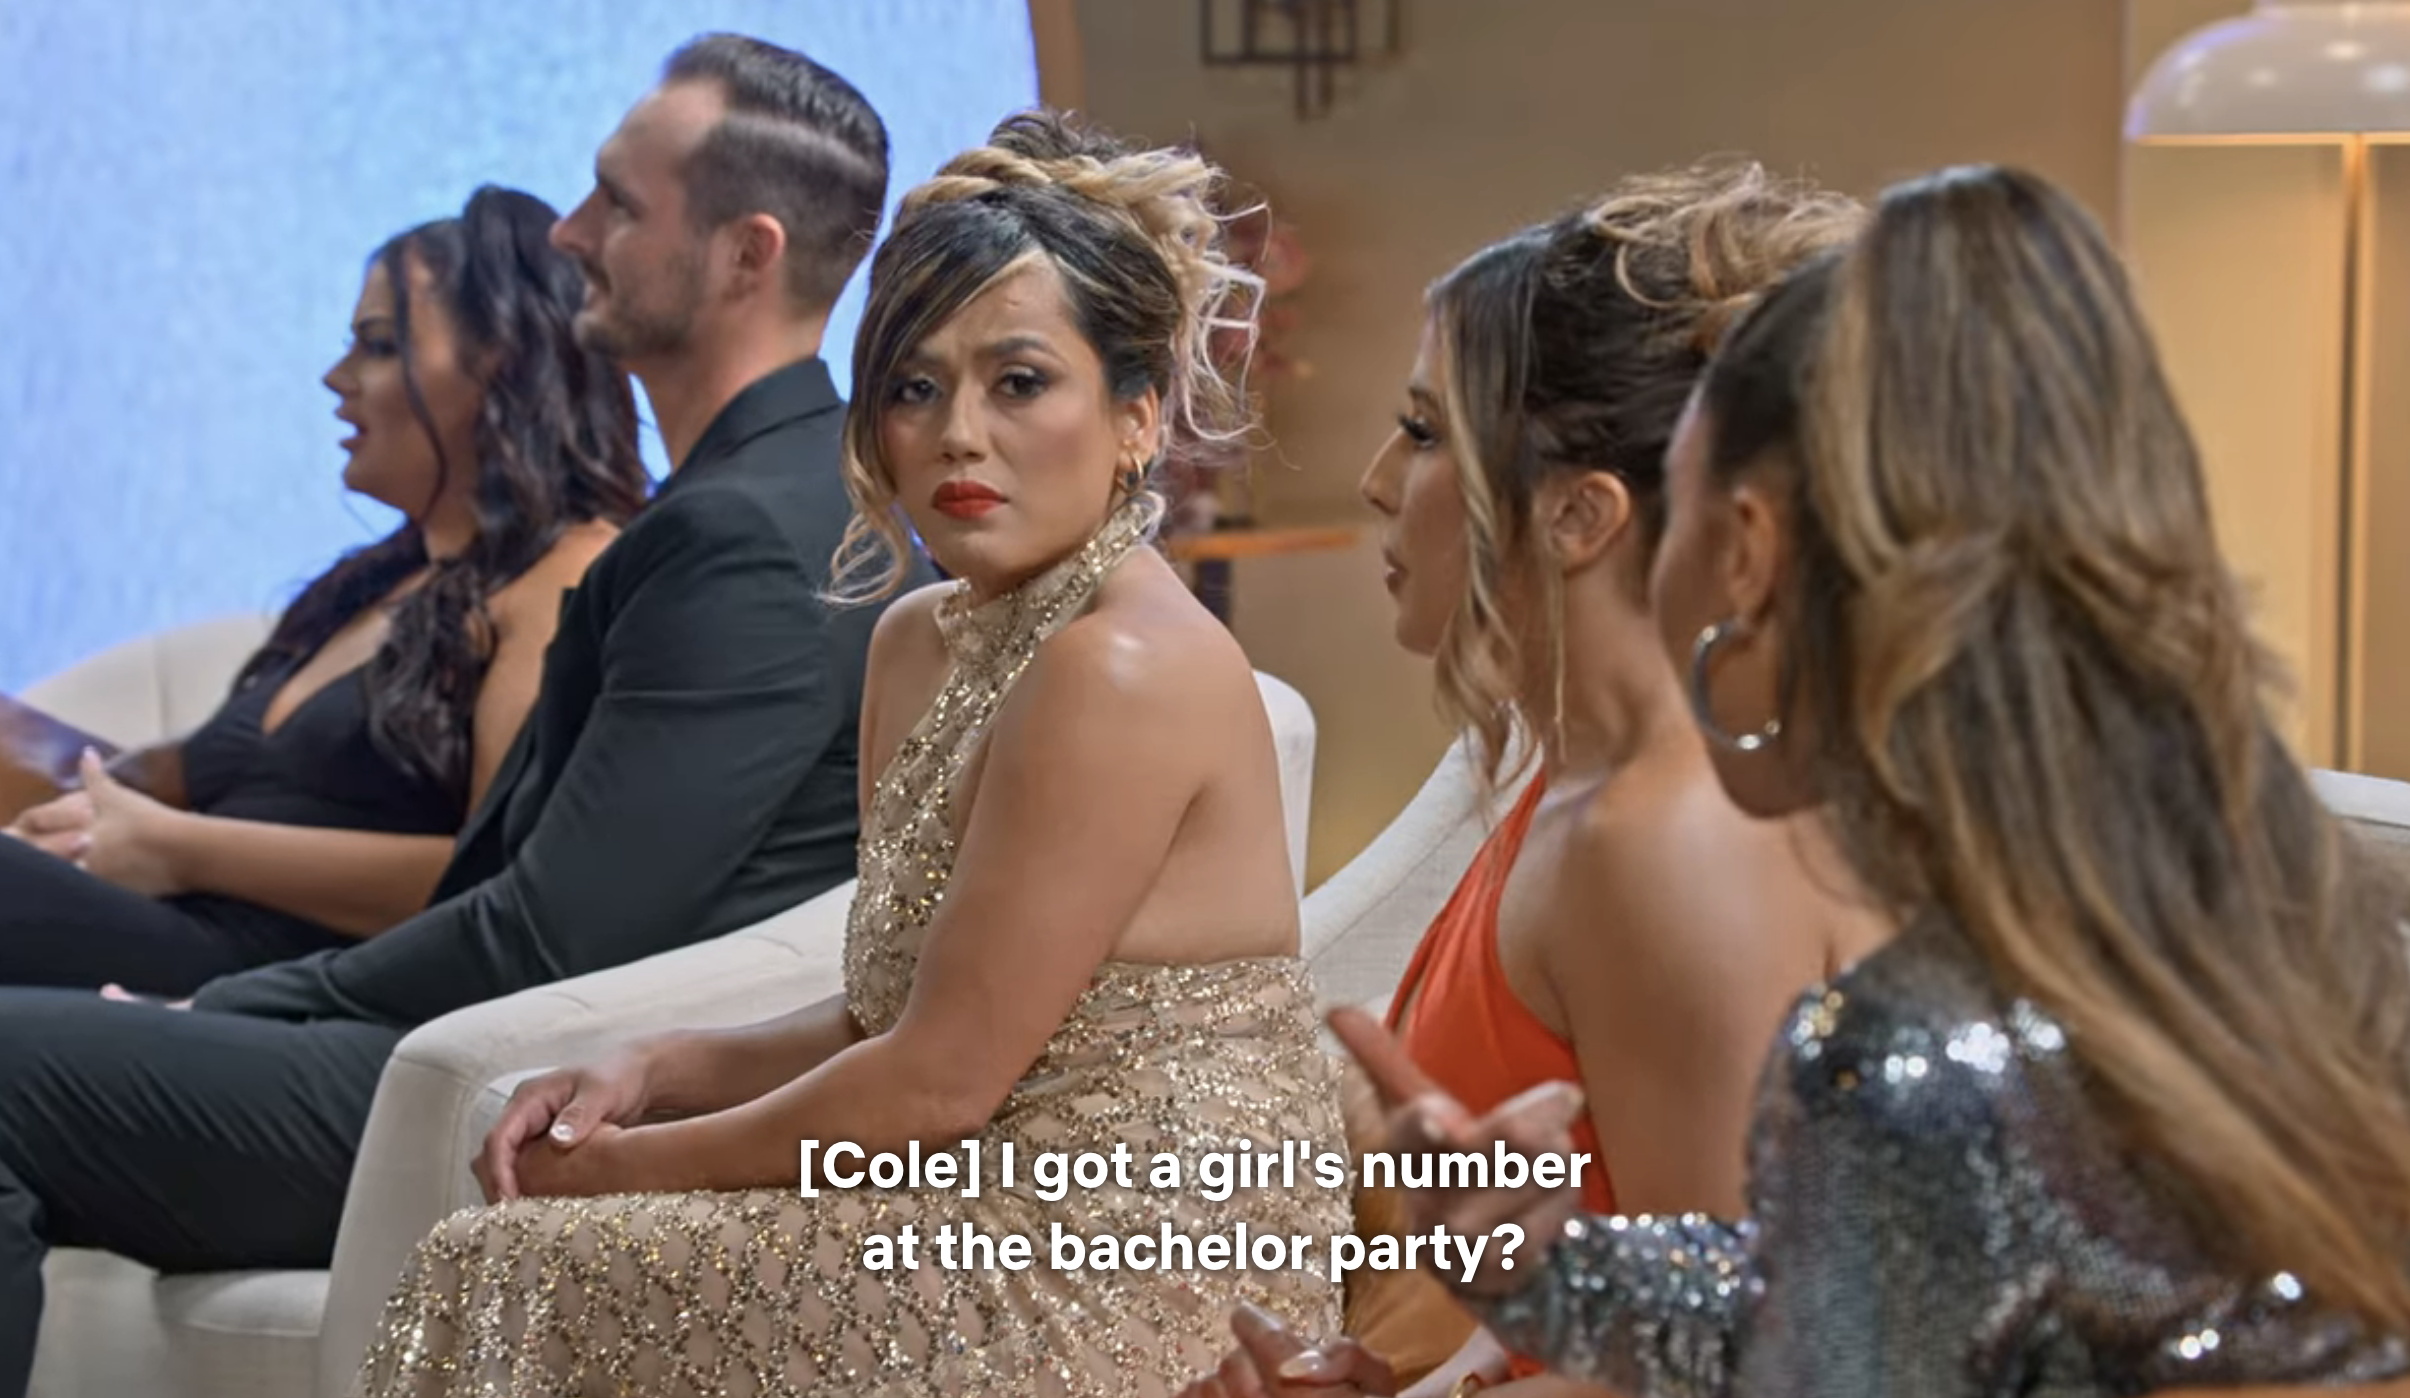 Nancy looking in the camera with caption &quot;[Cole] I got a girl&#x27;s number at the bachelor party?&quot;